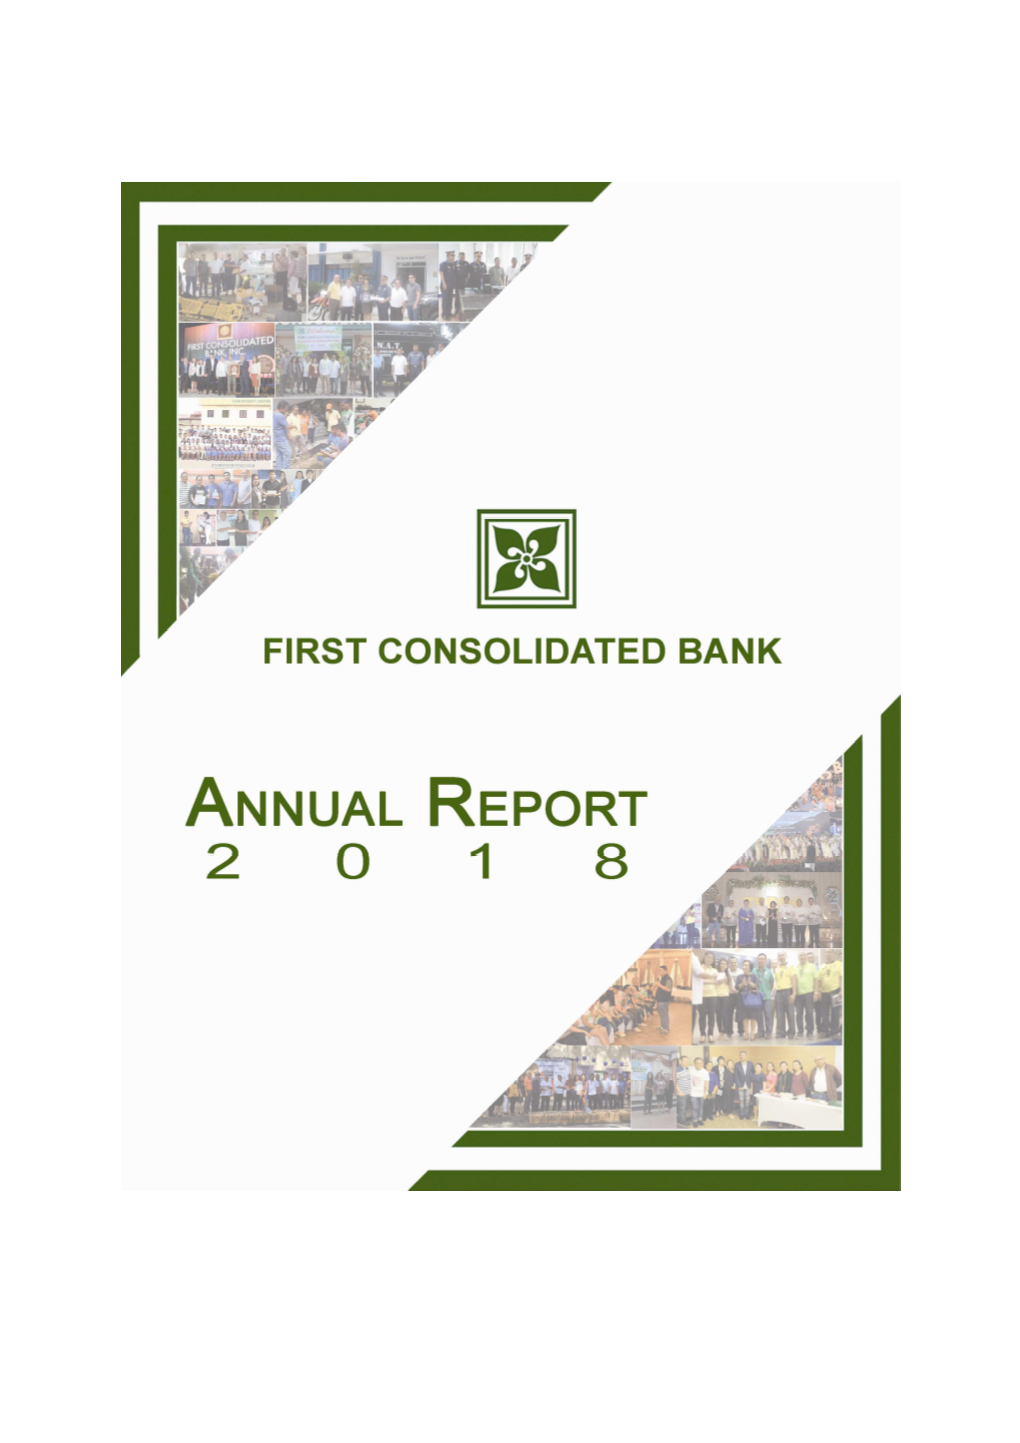 About First Consolidated Bank